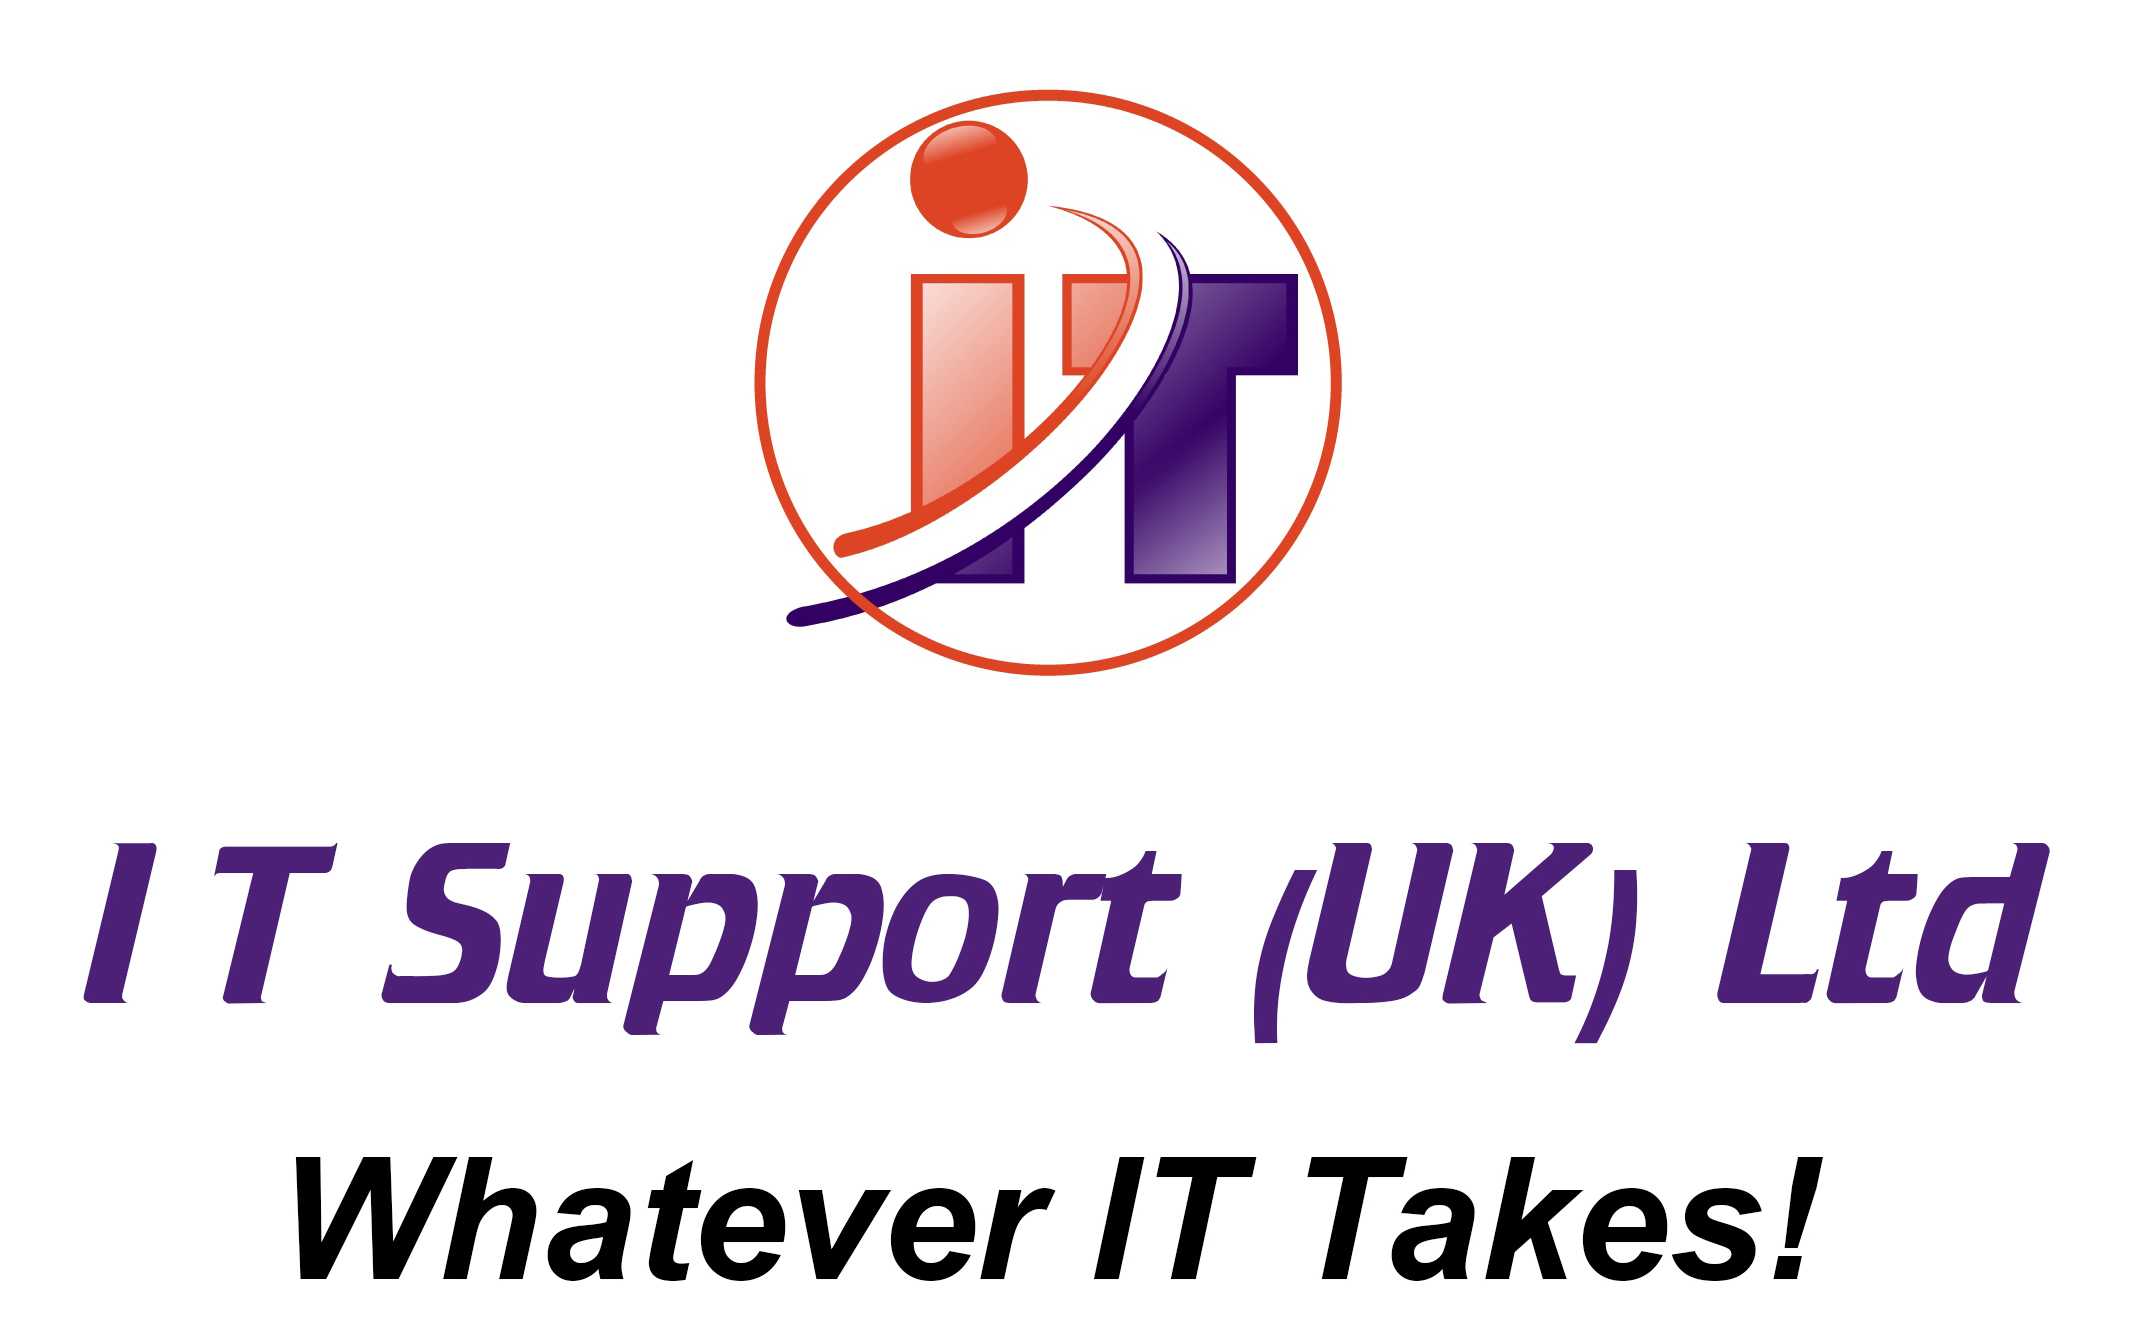 IT Support UK